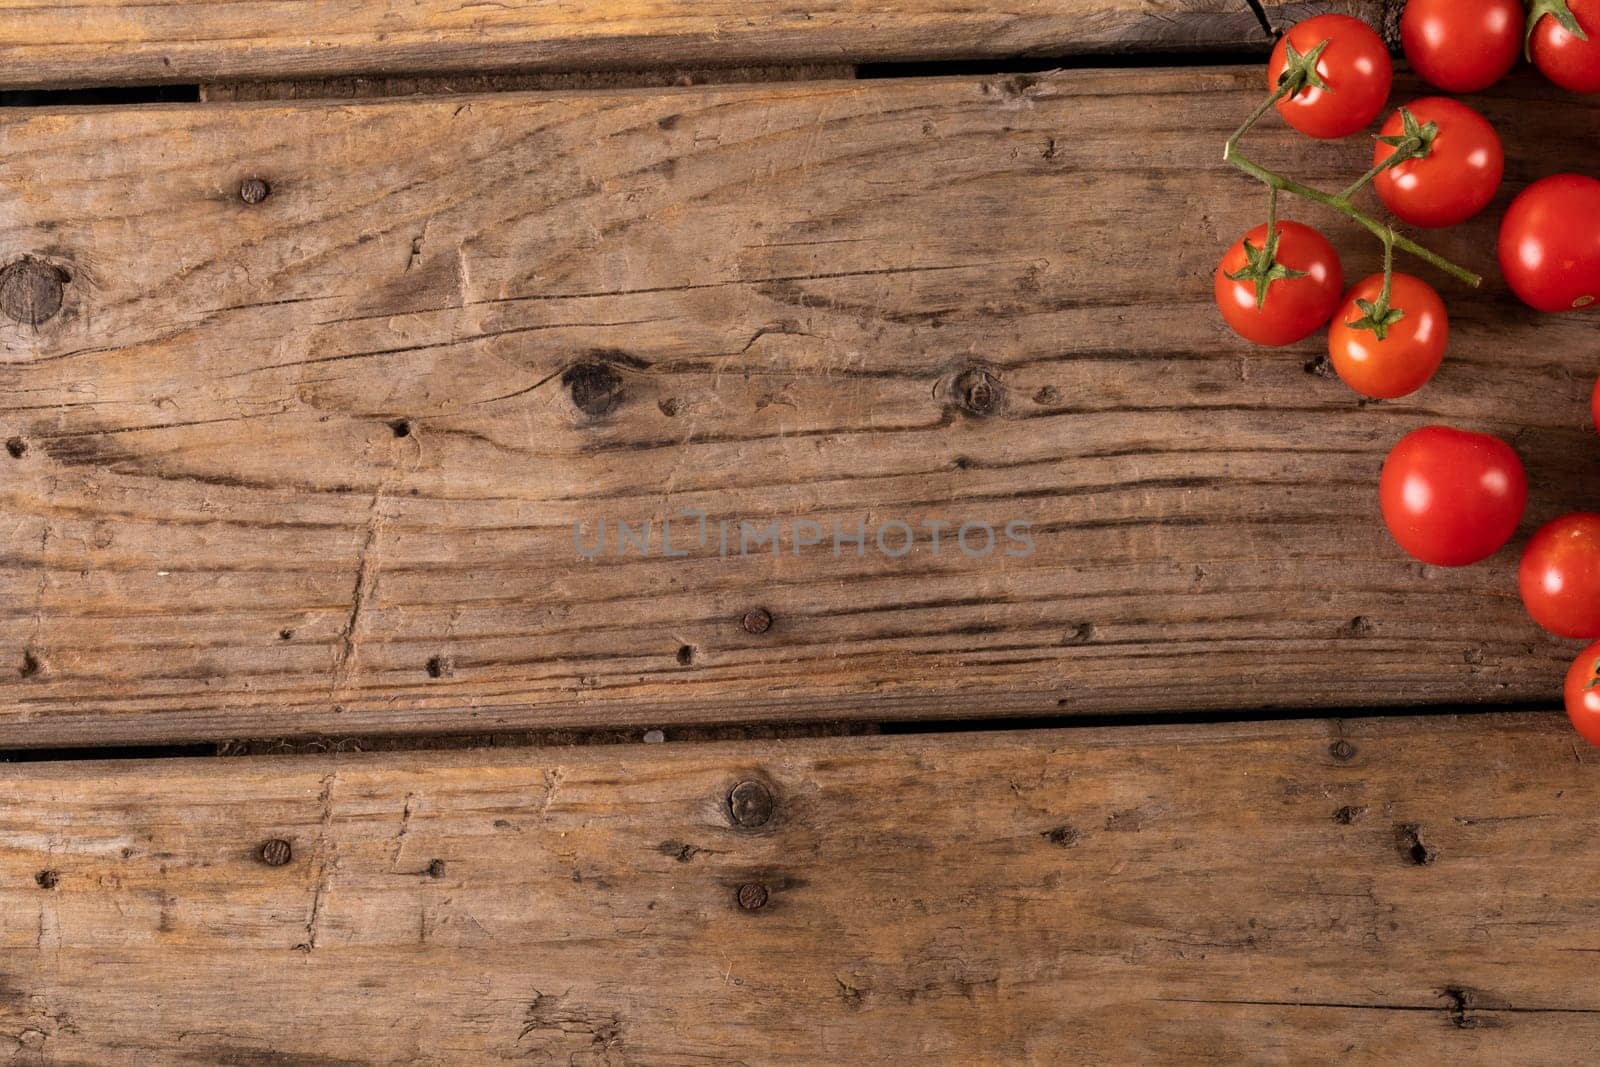 Overhead view of fresh cherry tomatoes on brown wooden table. unaltered, organic food and healthy eating concept.